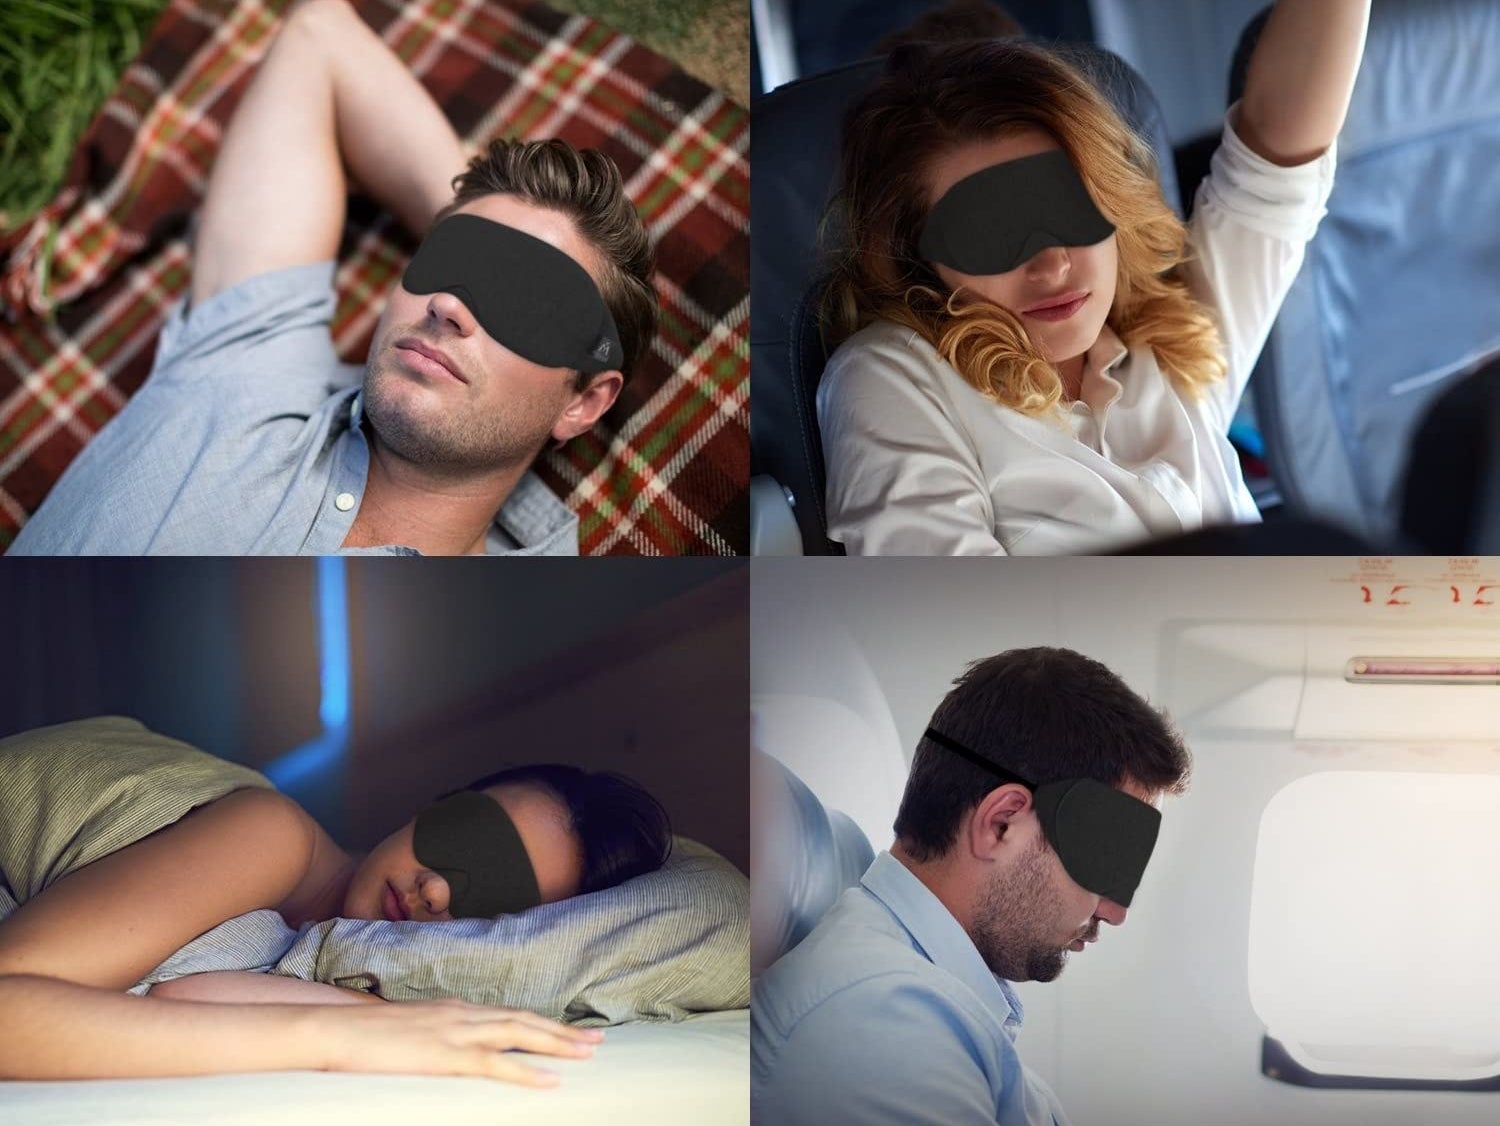 People using the sleep mask in several different settings